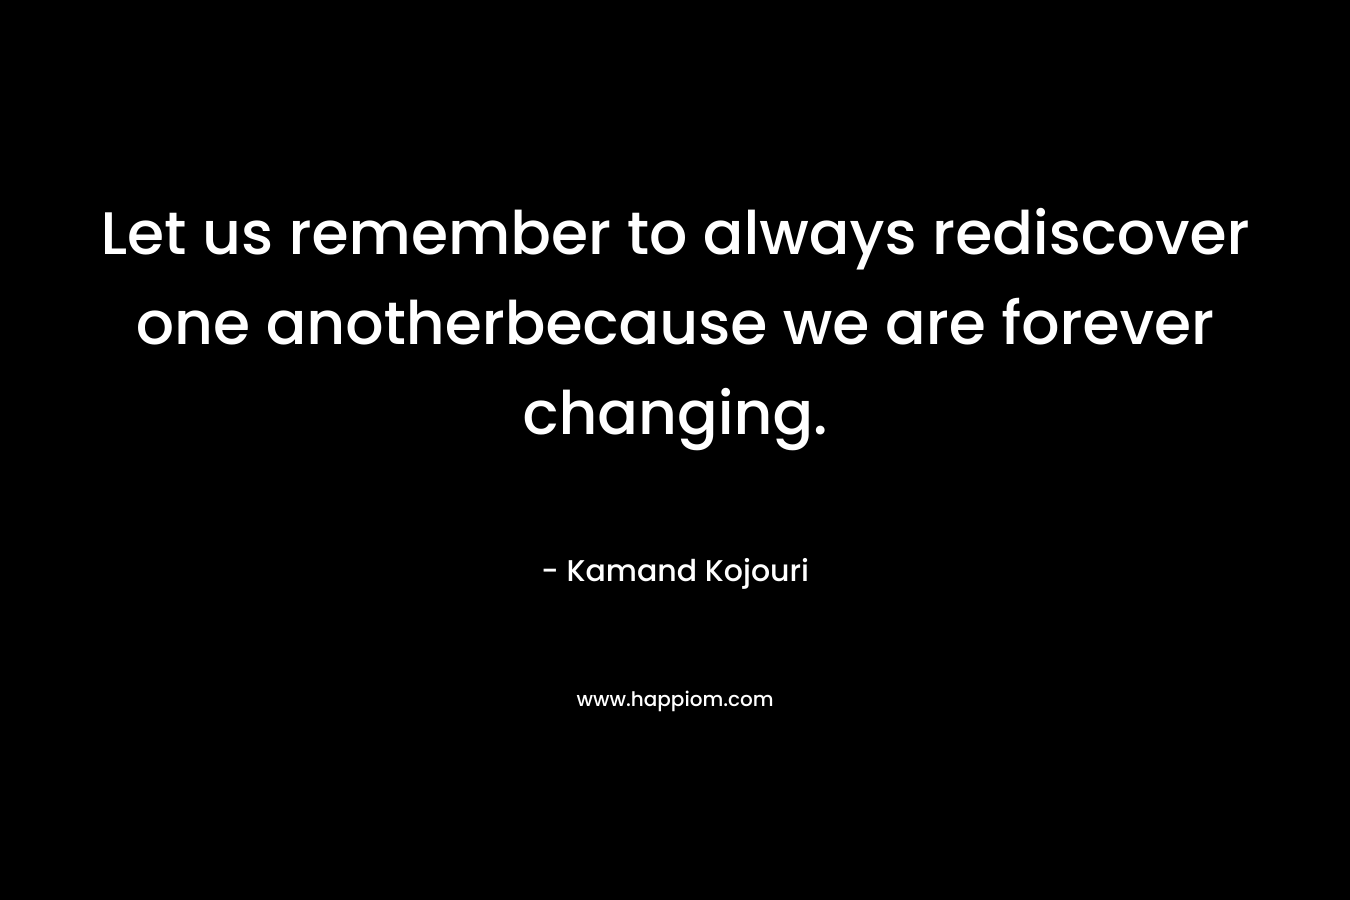 Let us remember to always rediscover one anotherbecause we are forever changing. – Kamand Kojouri